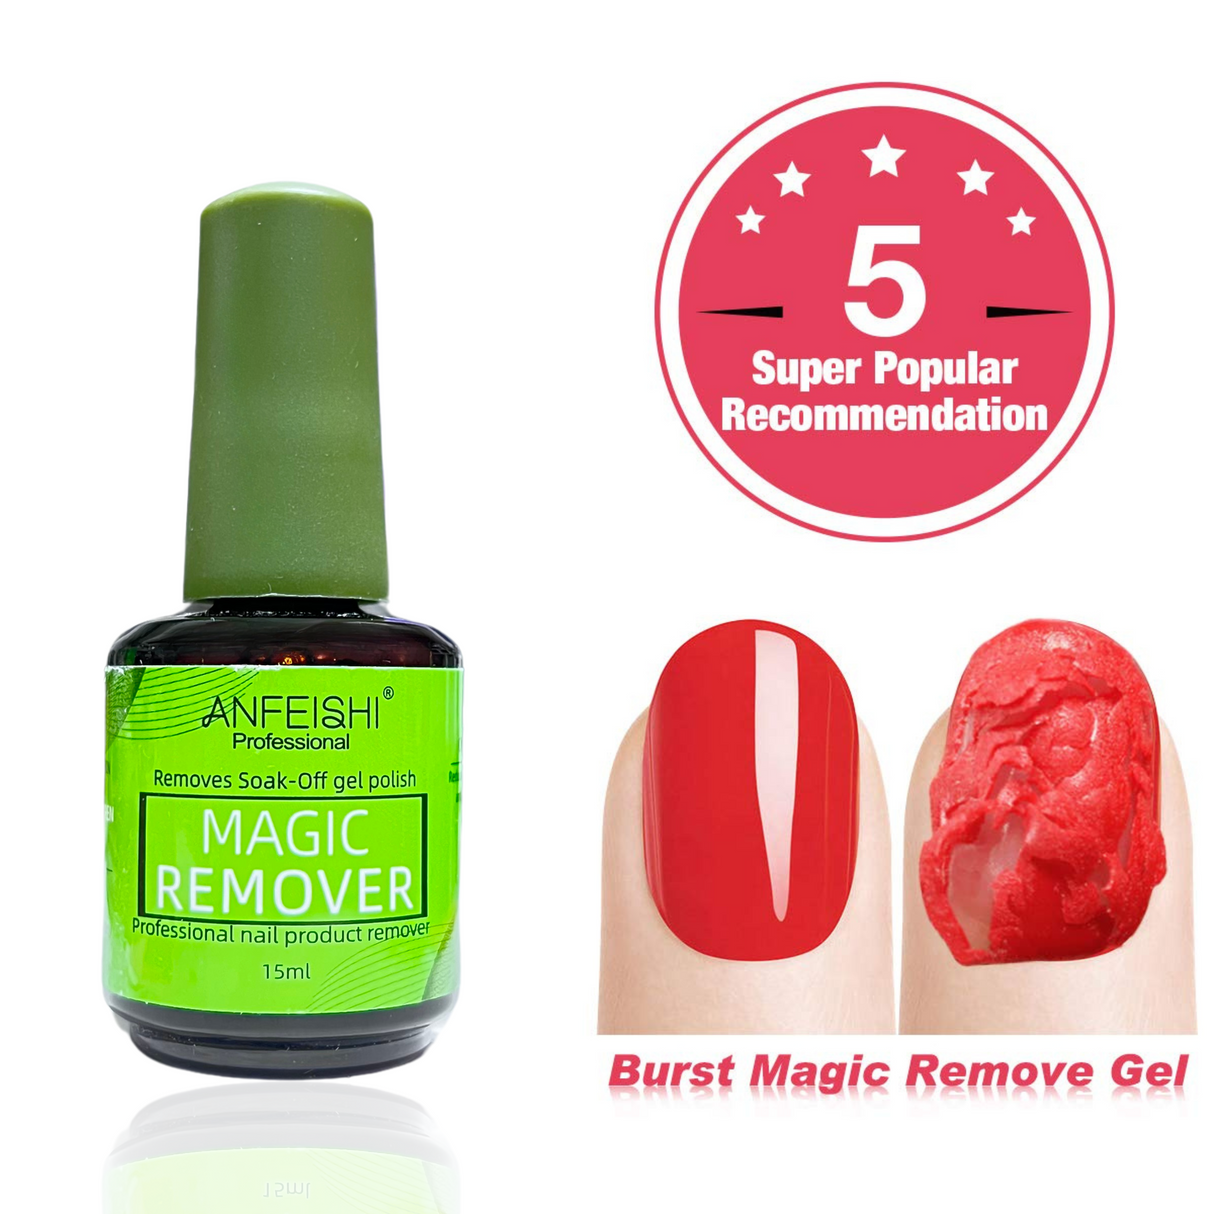 Gelish remover: Professional, removes soak-off gel polish in 3-5 minutes without harming nails. Quick and easy. - Theresia Cosmetics - nail care - Theresia Cosmetics